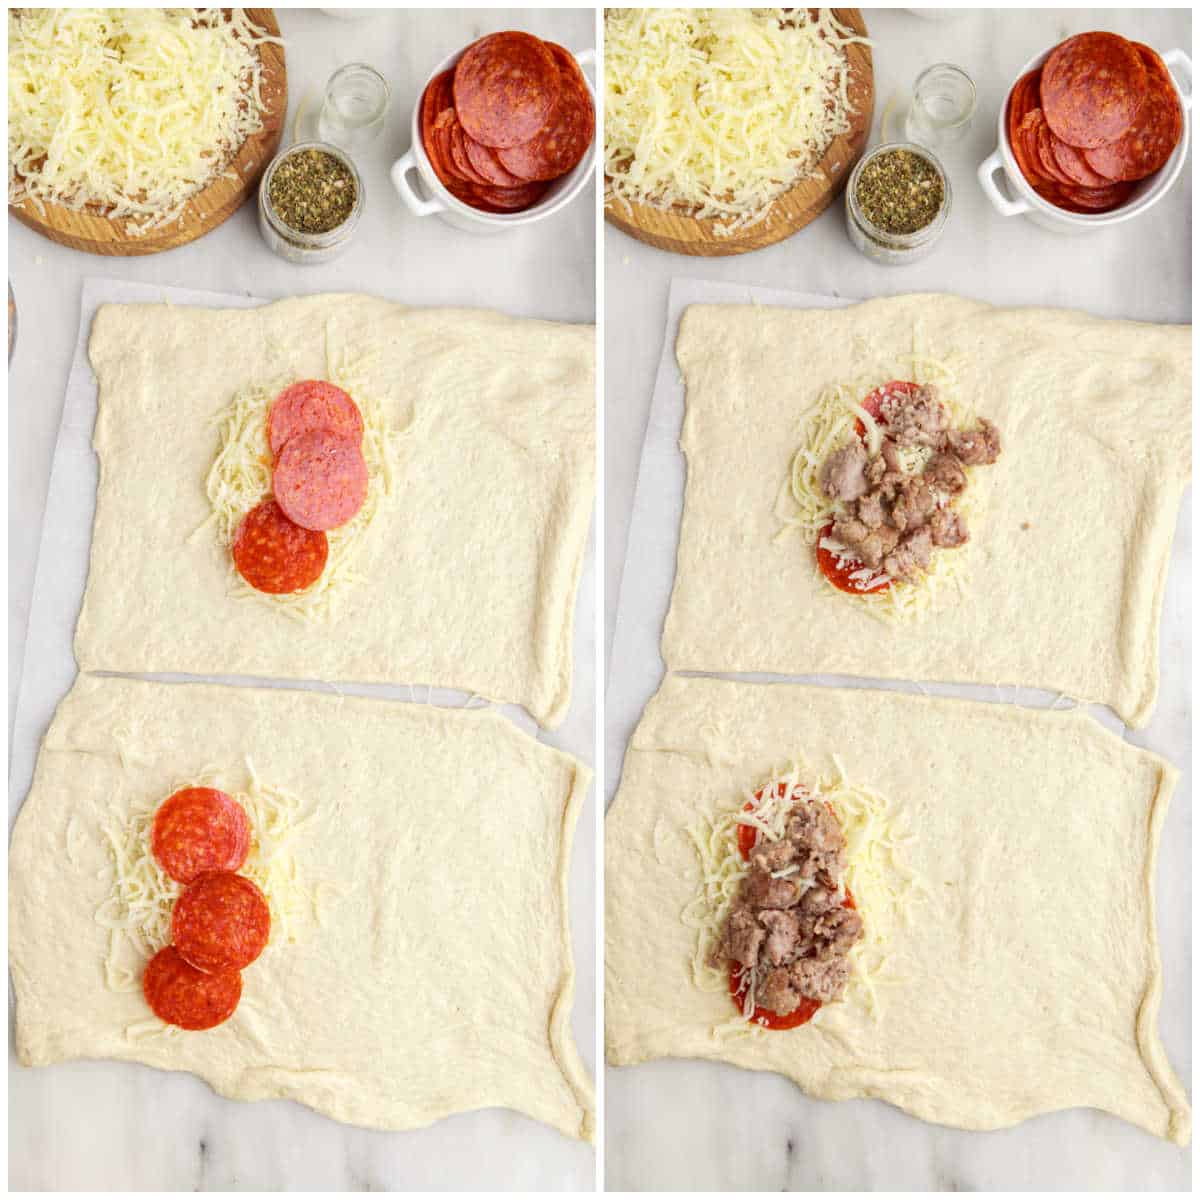 Steps to make meat calzone.